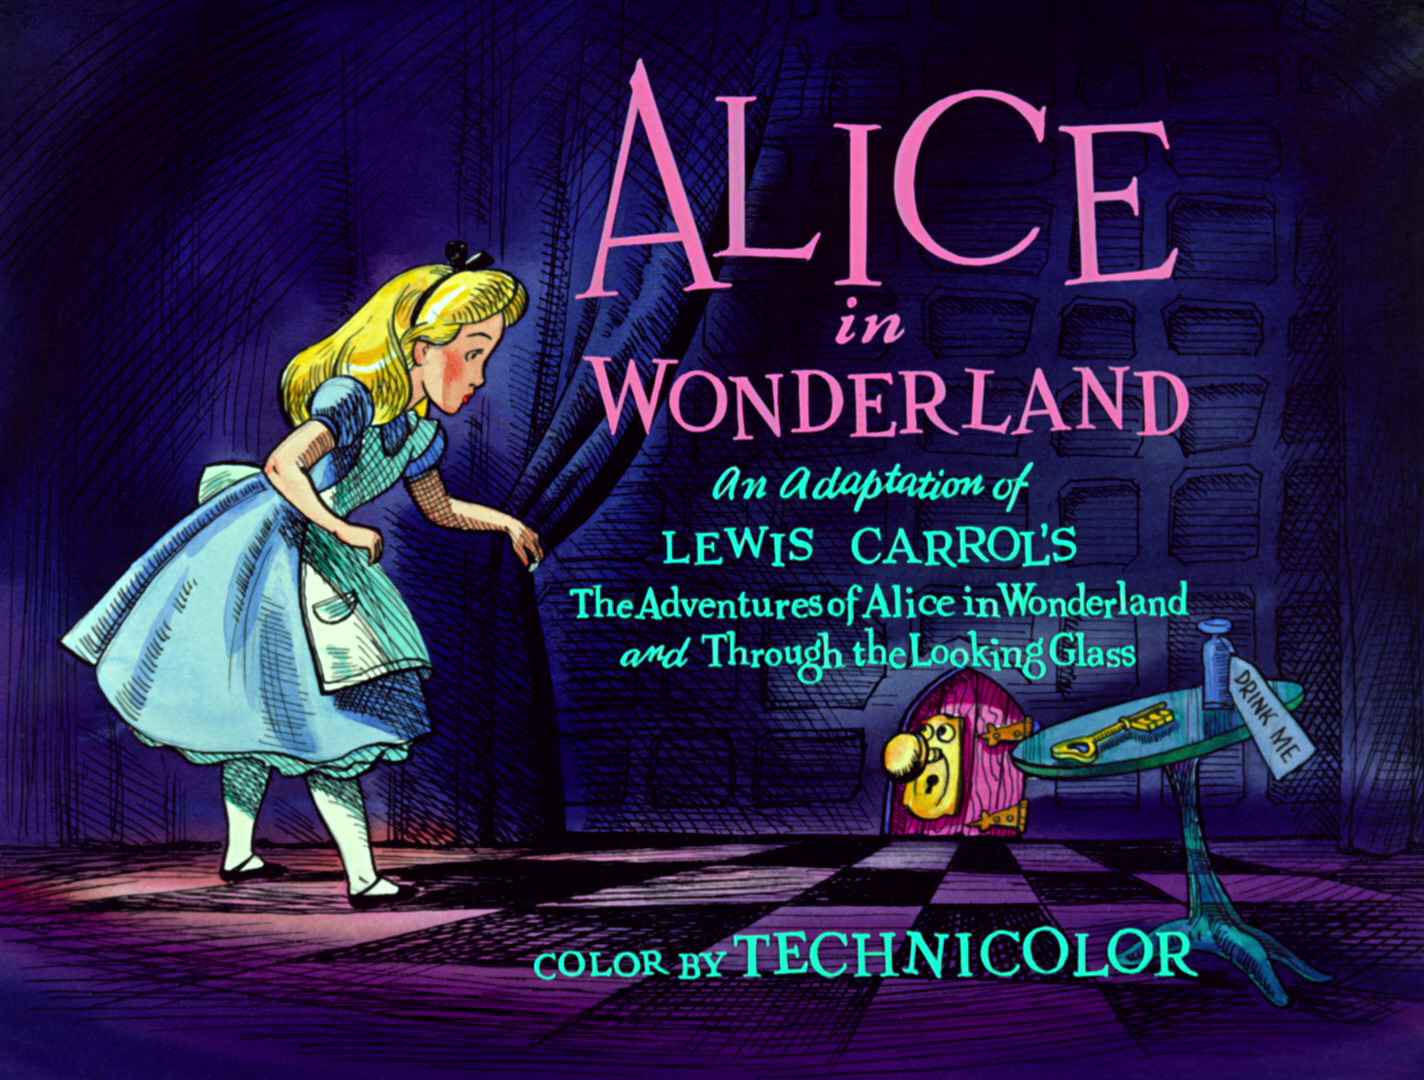 5 Fascinating Facts About Disney's 'Alice in Wonderland' as it